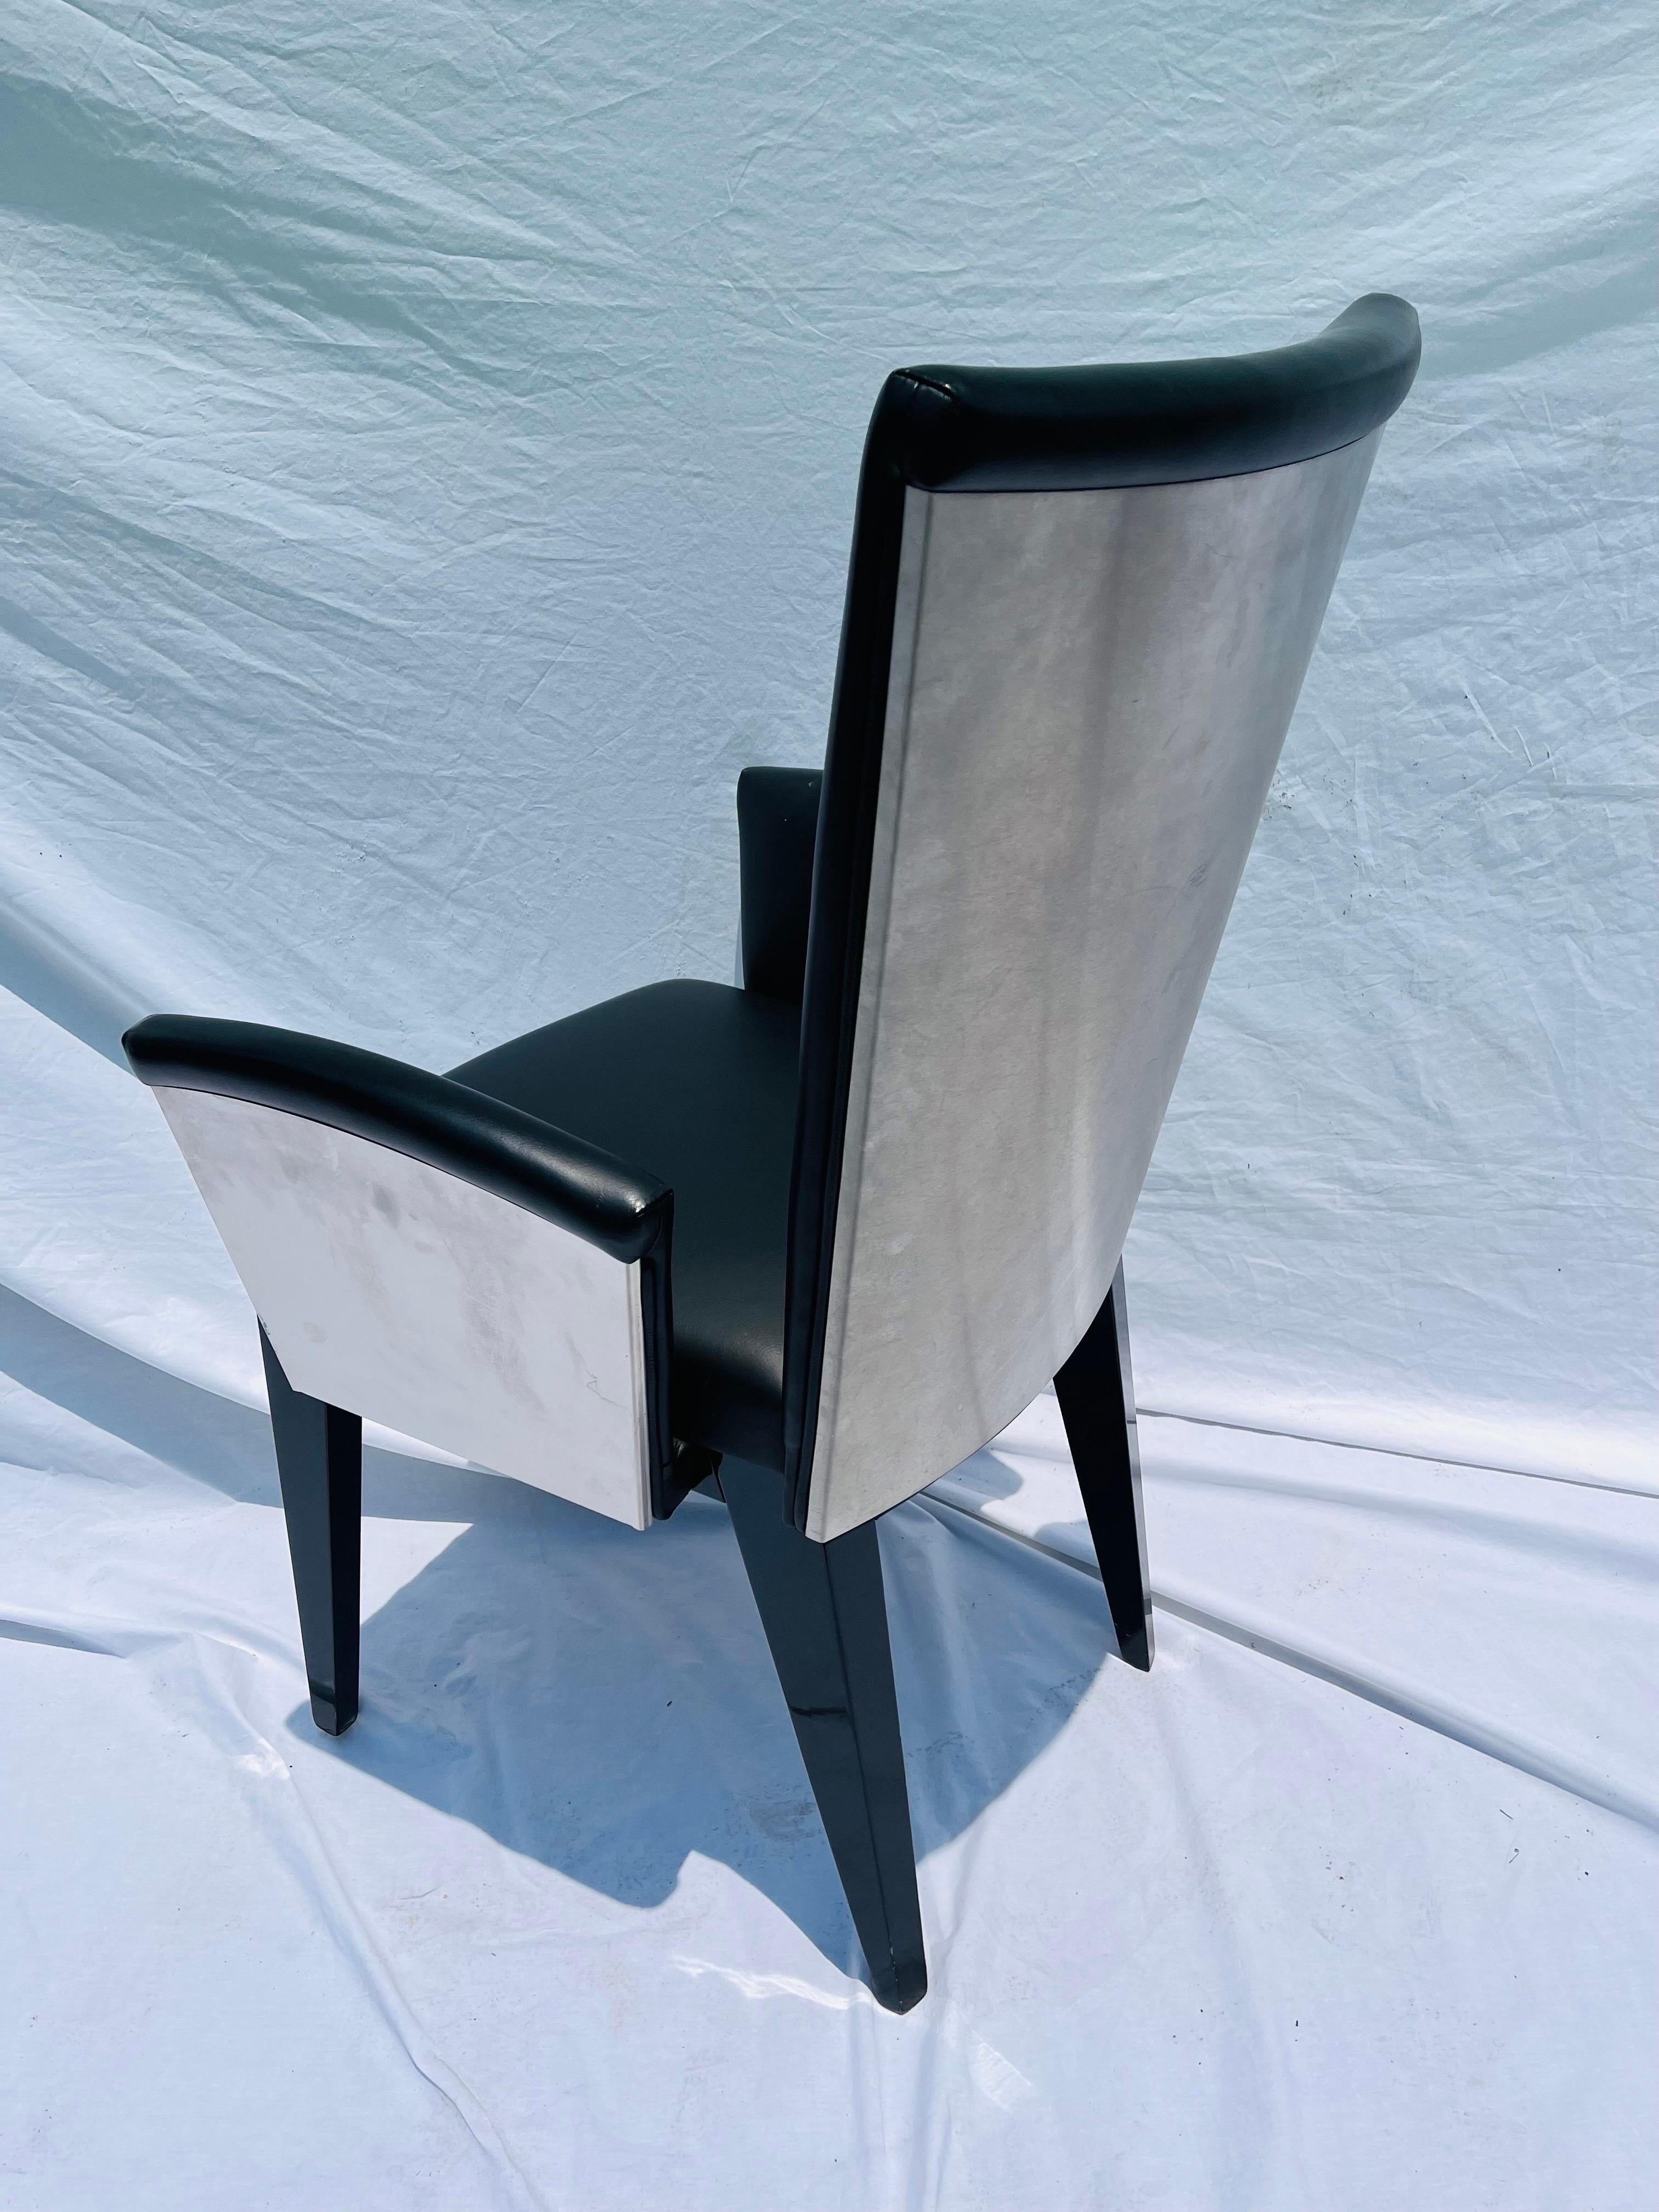 A set of eight, post modern style, leather, stainless steel and wood Italian dining arm chairs. With clean lines clearly inspired by classic designers Renzo Fauciglietti and Graziella Bianchi when they designed the Bottega chair for Design Within